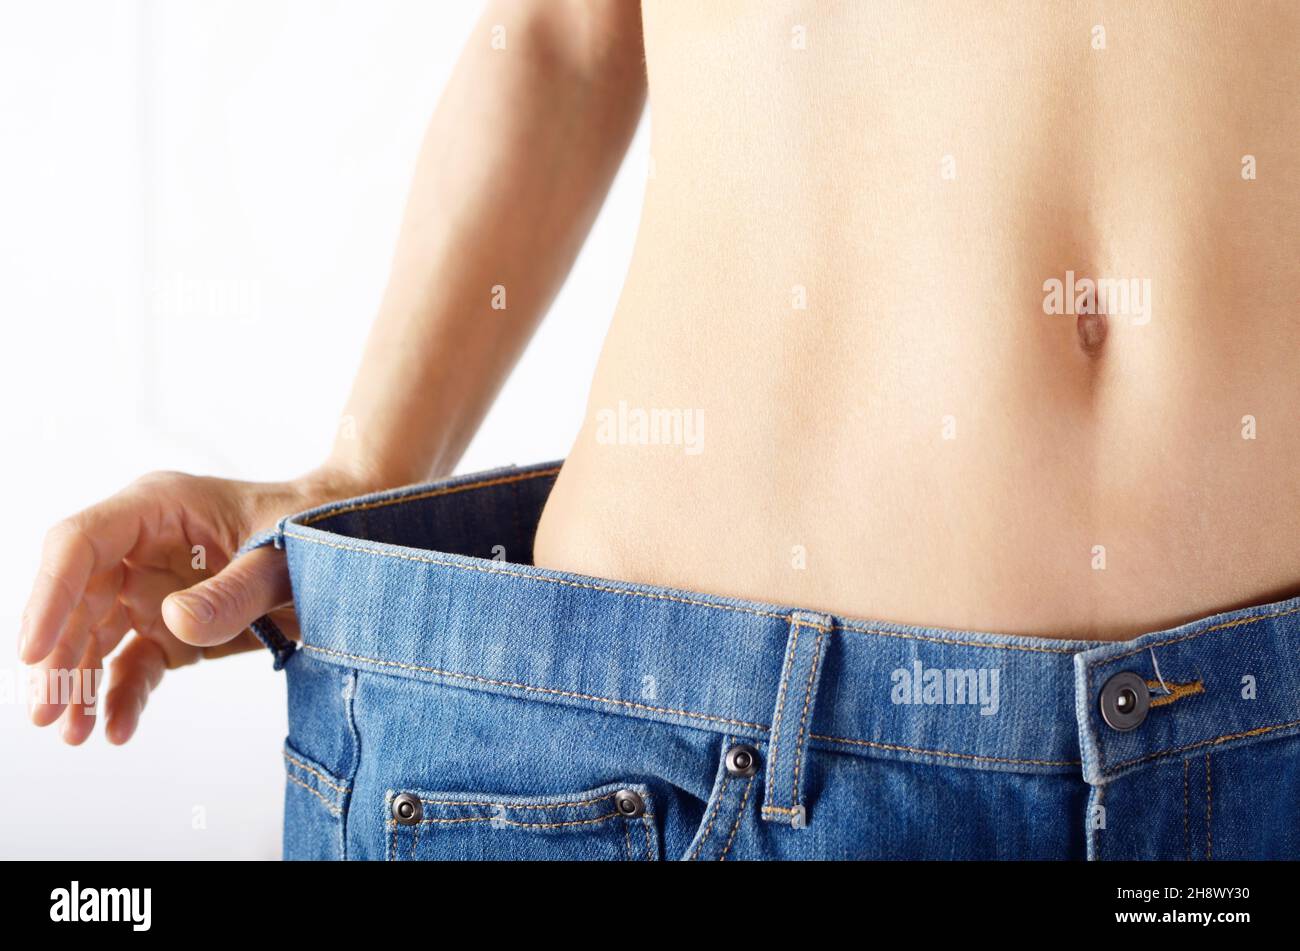 Caucasian female model in blue jeans showing her flat stomach. Weightloss concept. Stock Photo